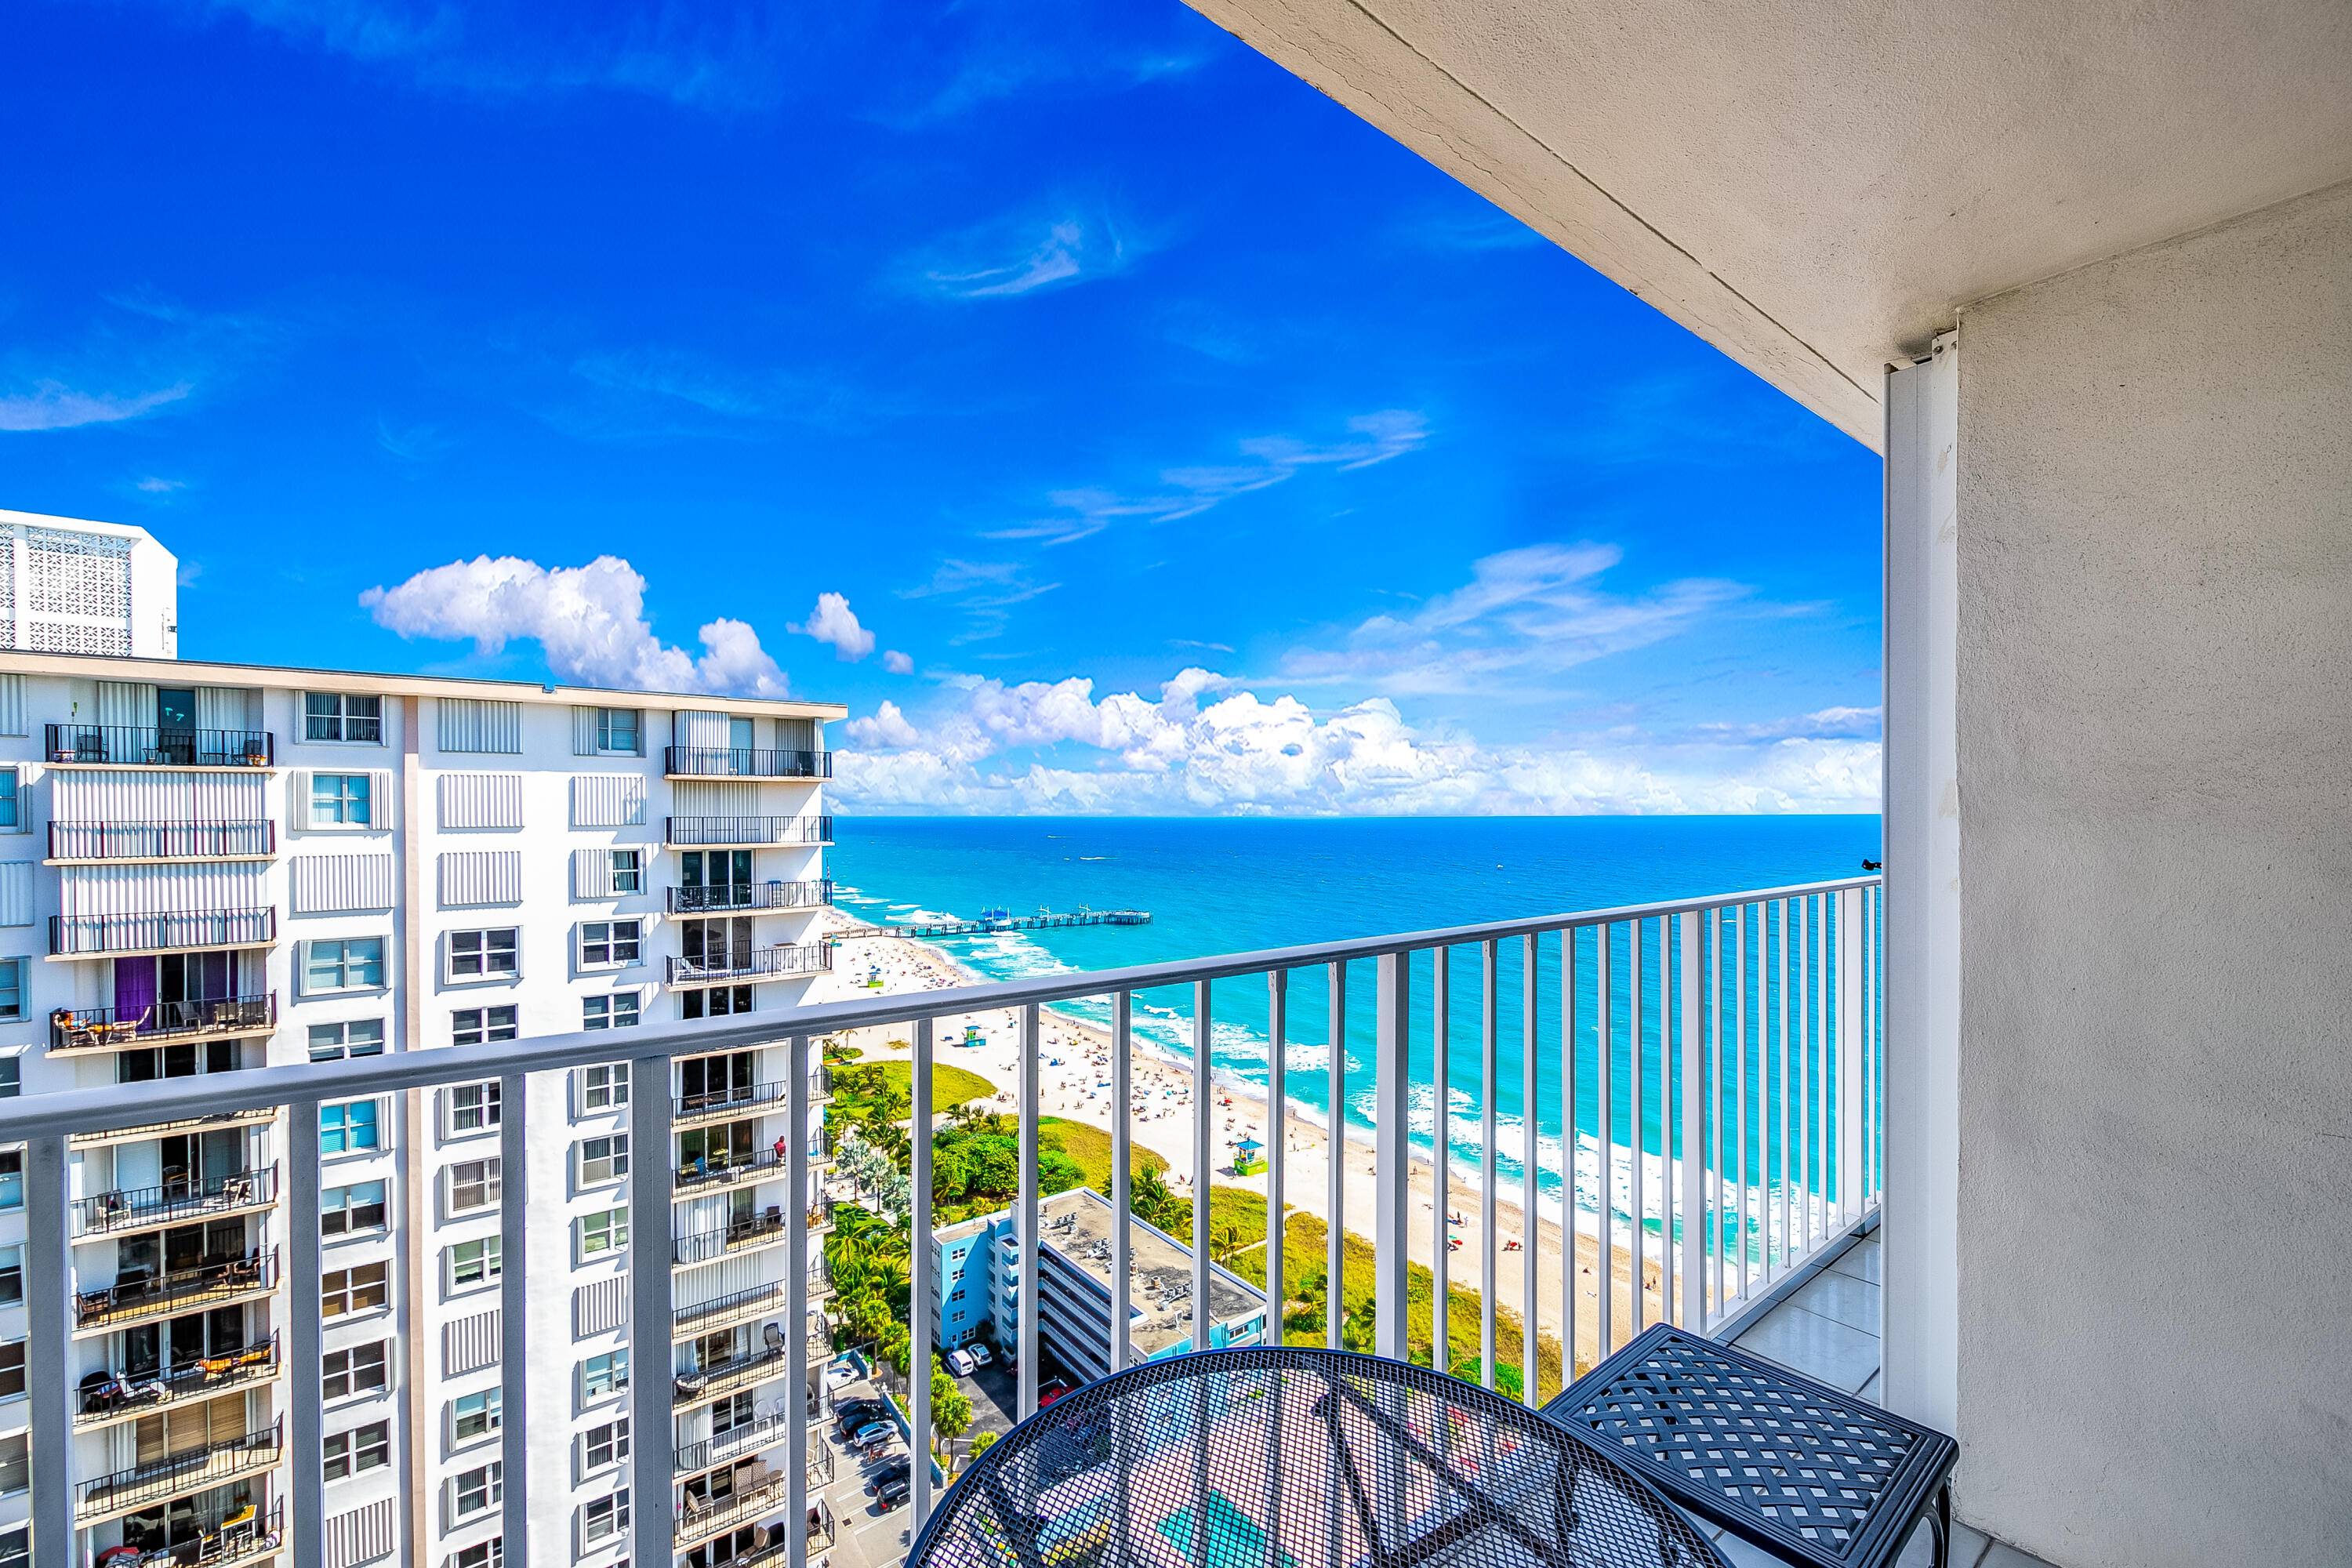 Don't miss waking up to these views of the intracoastal and beach !